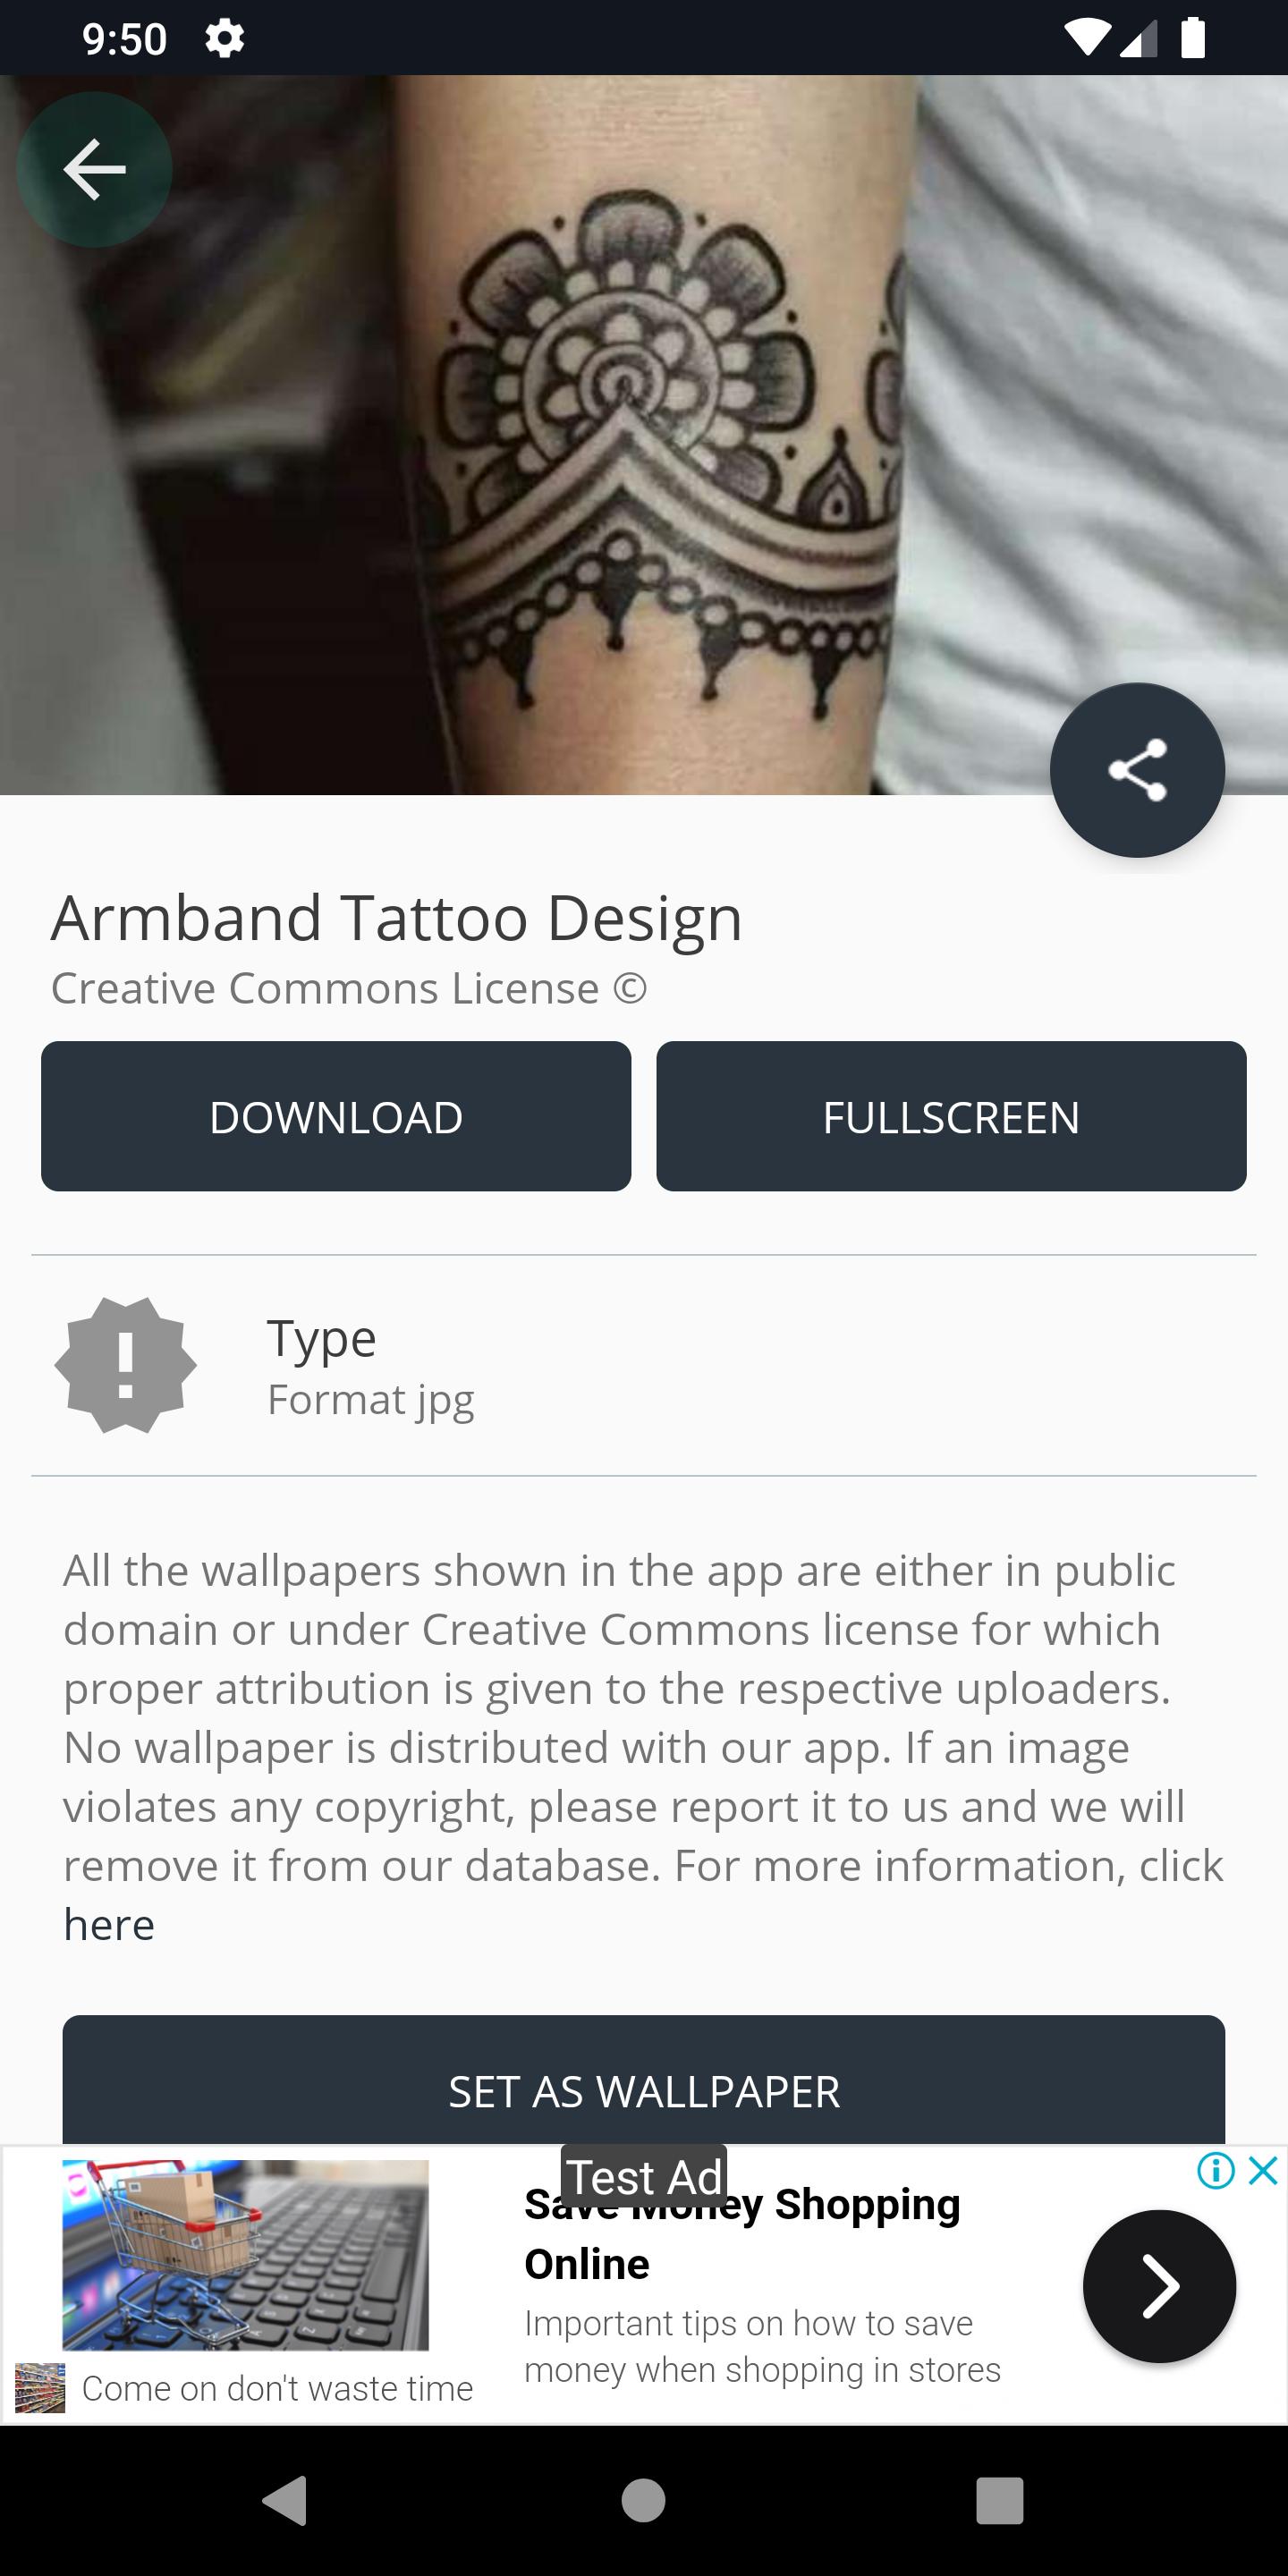 Armband Tattoo Design for Android - APK Download